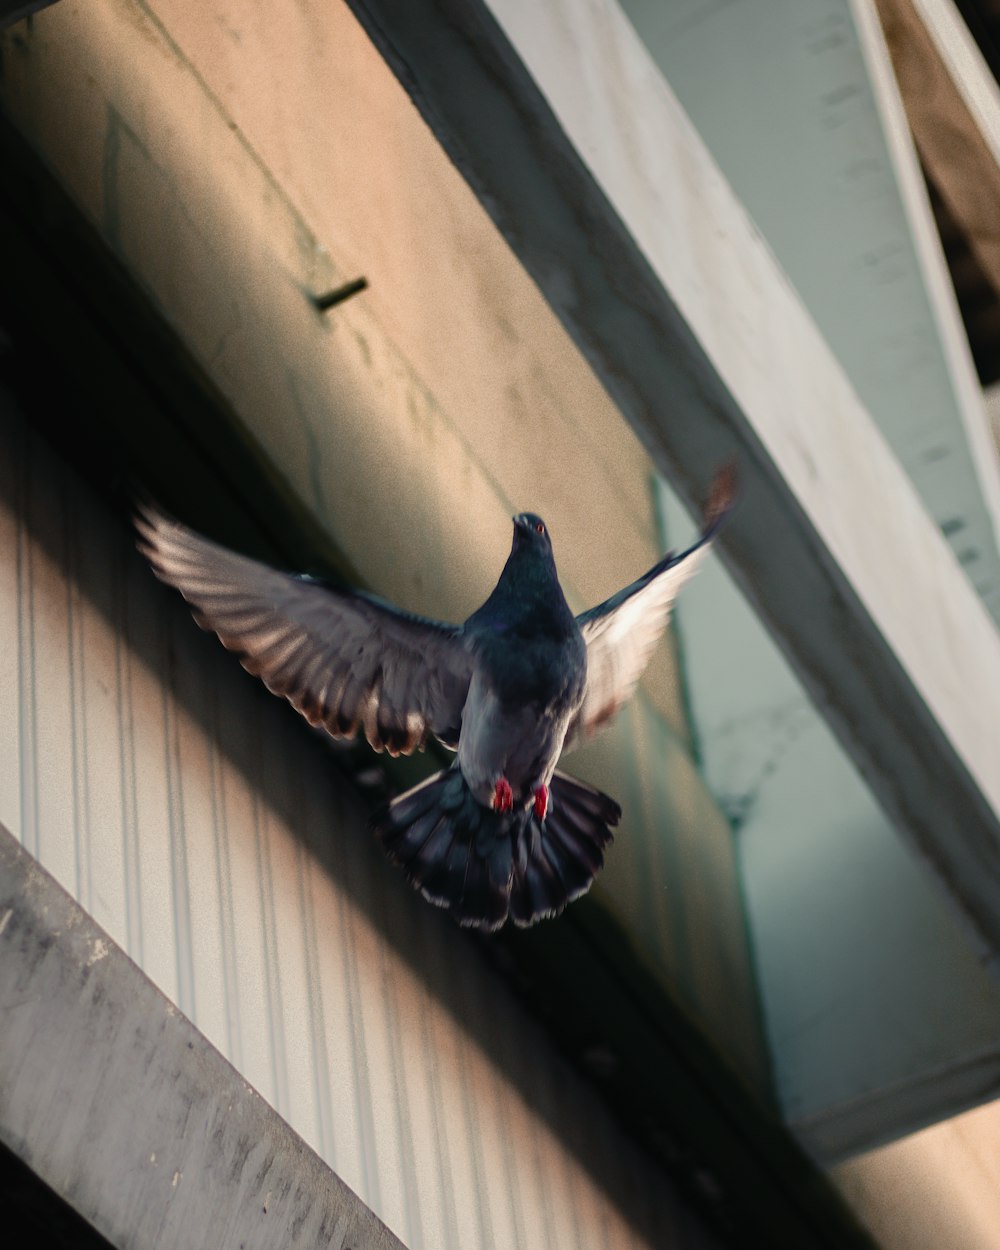 a pigeon flying in the air near a building